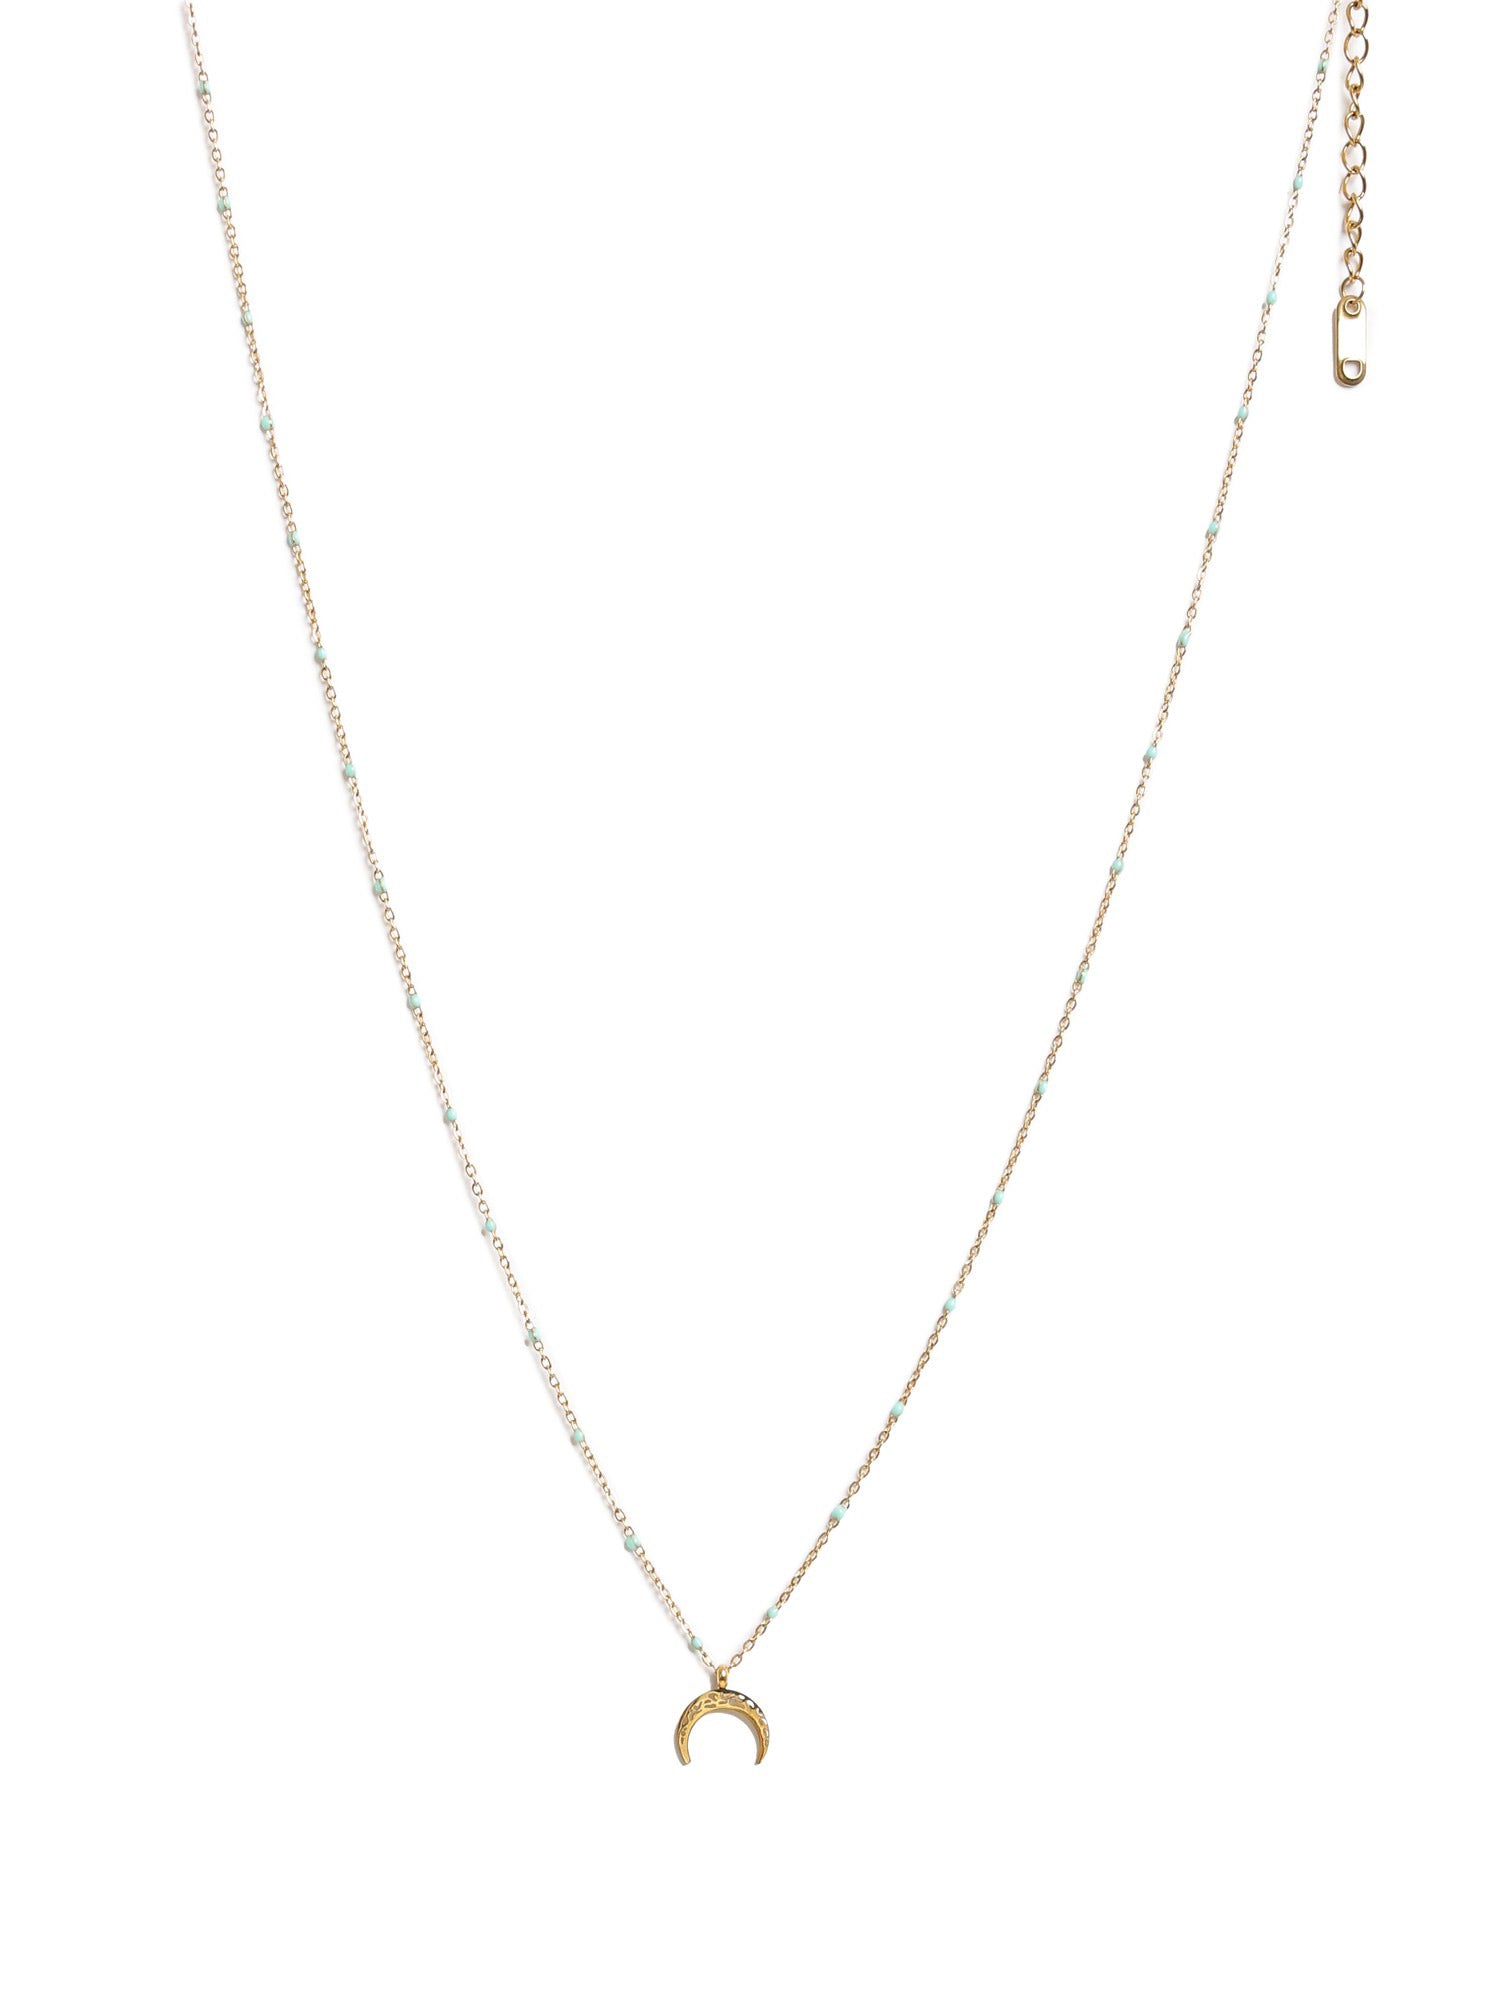 Ecliptic Gold-Tone Stainless Steel Chain Necklace